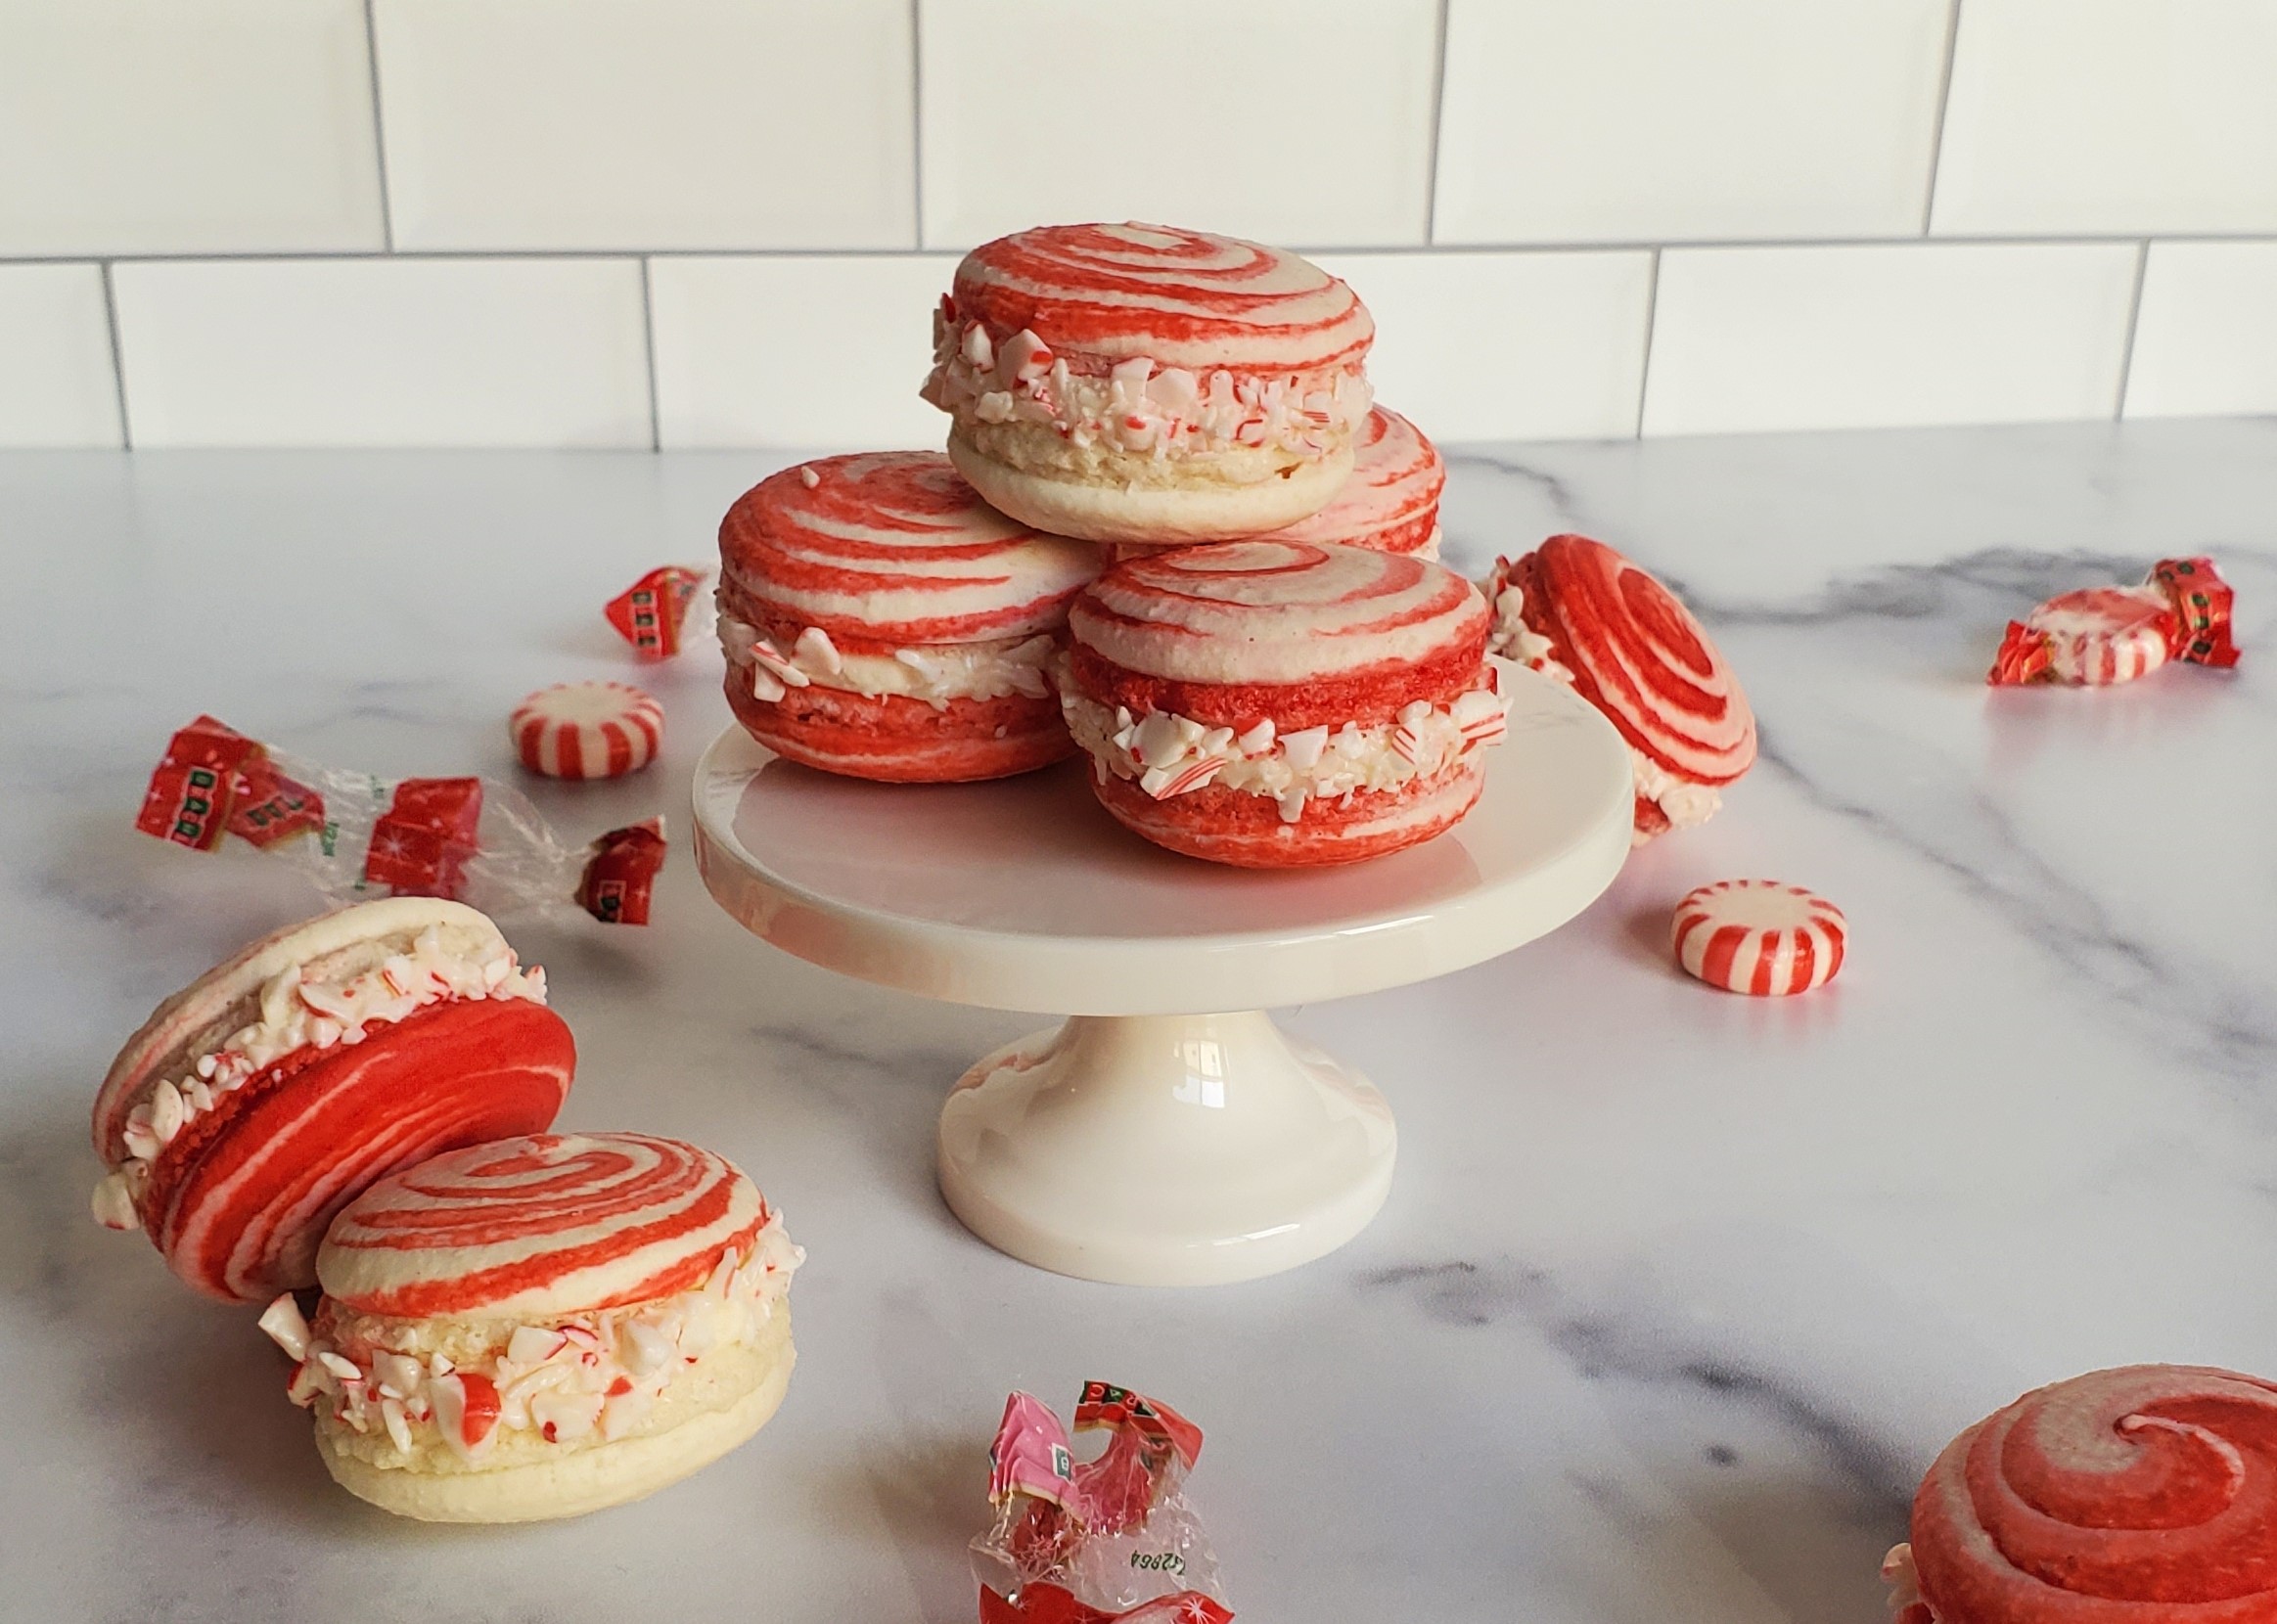 Peppermint swirl macarons on a small pedestal, surrounded by more macarons and peppermints with wrappers.